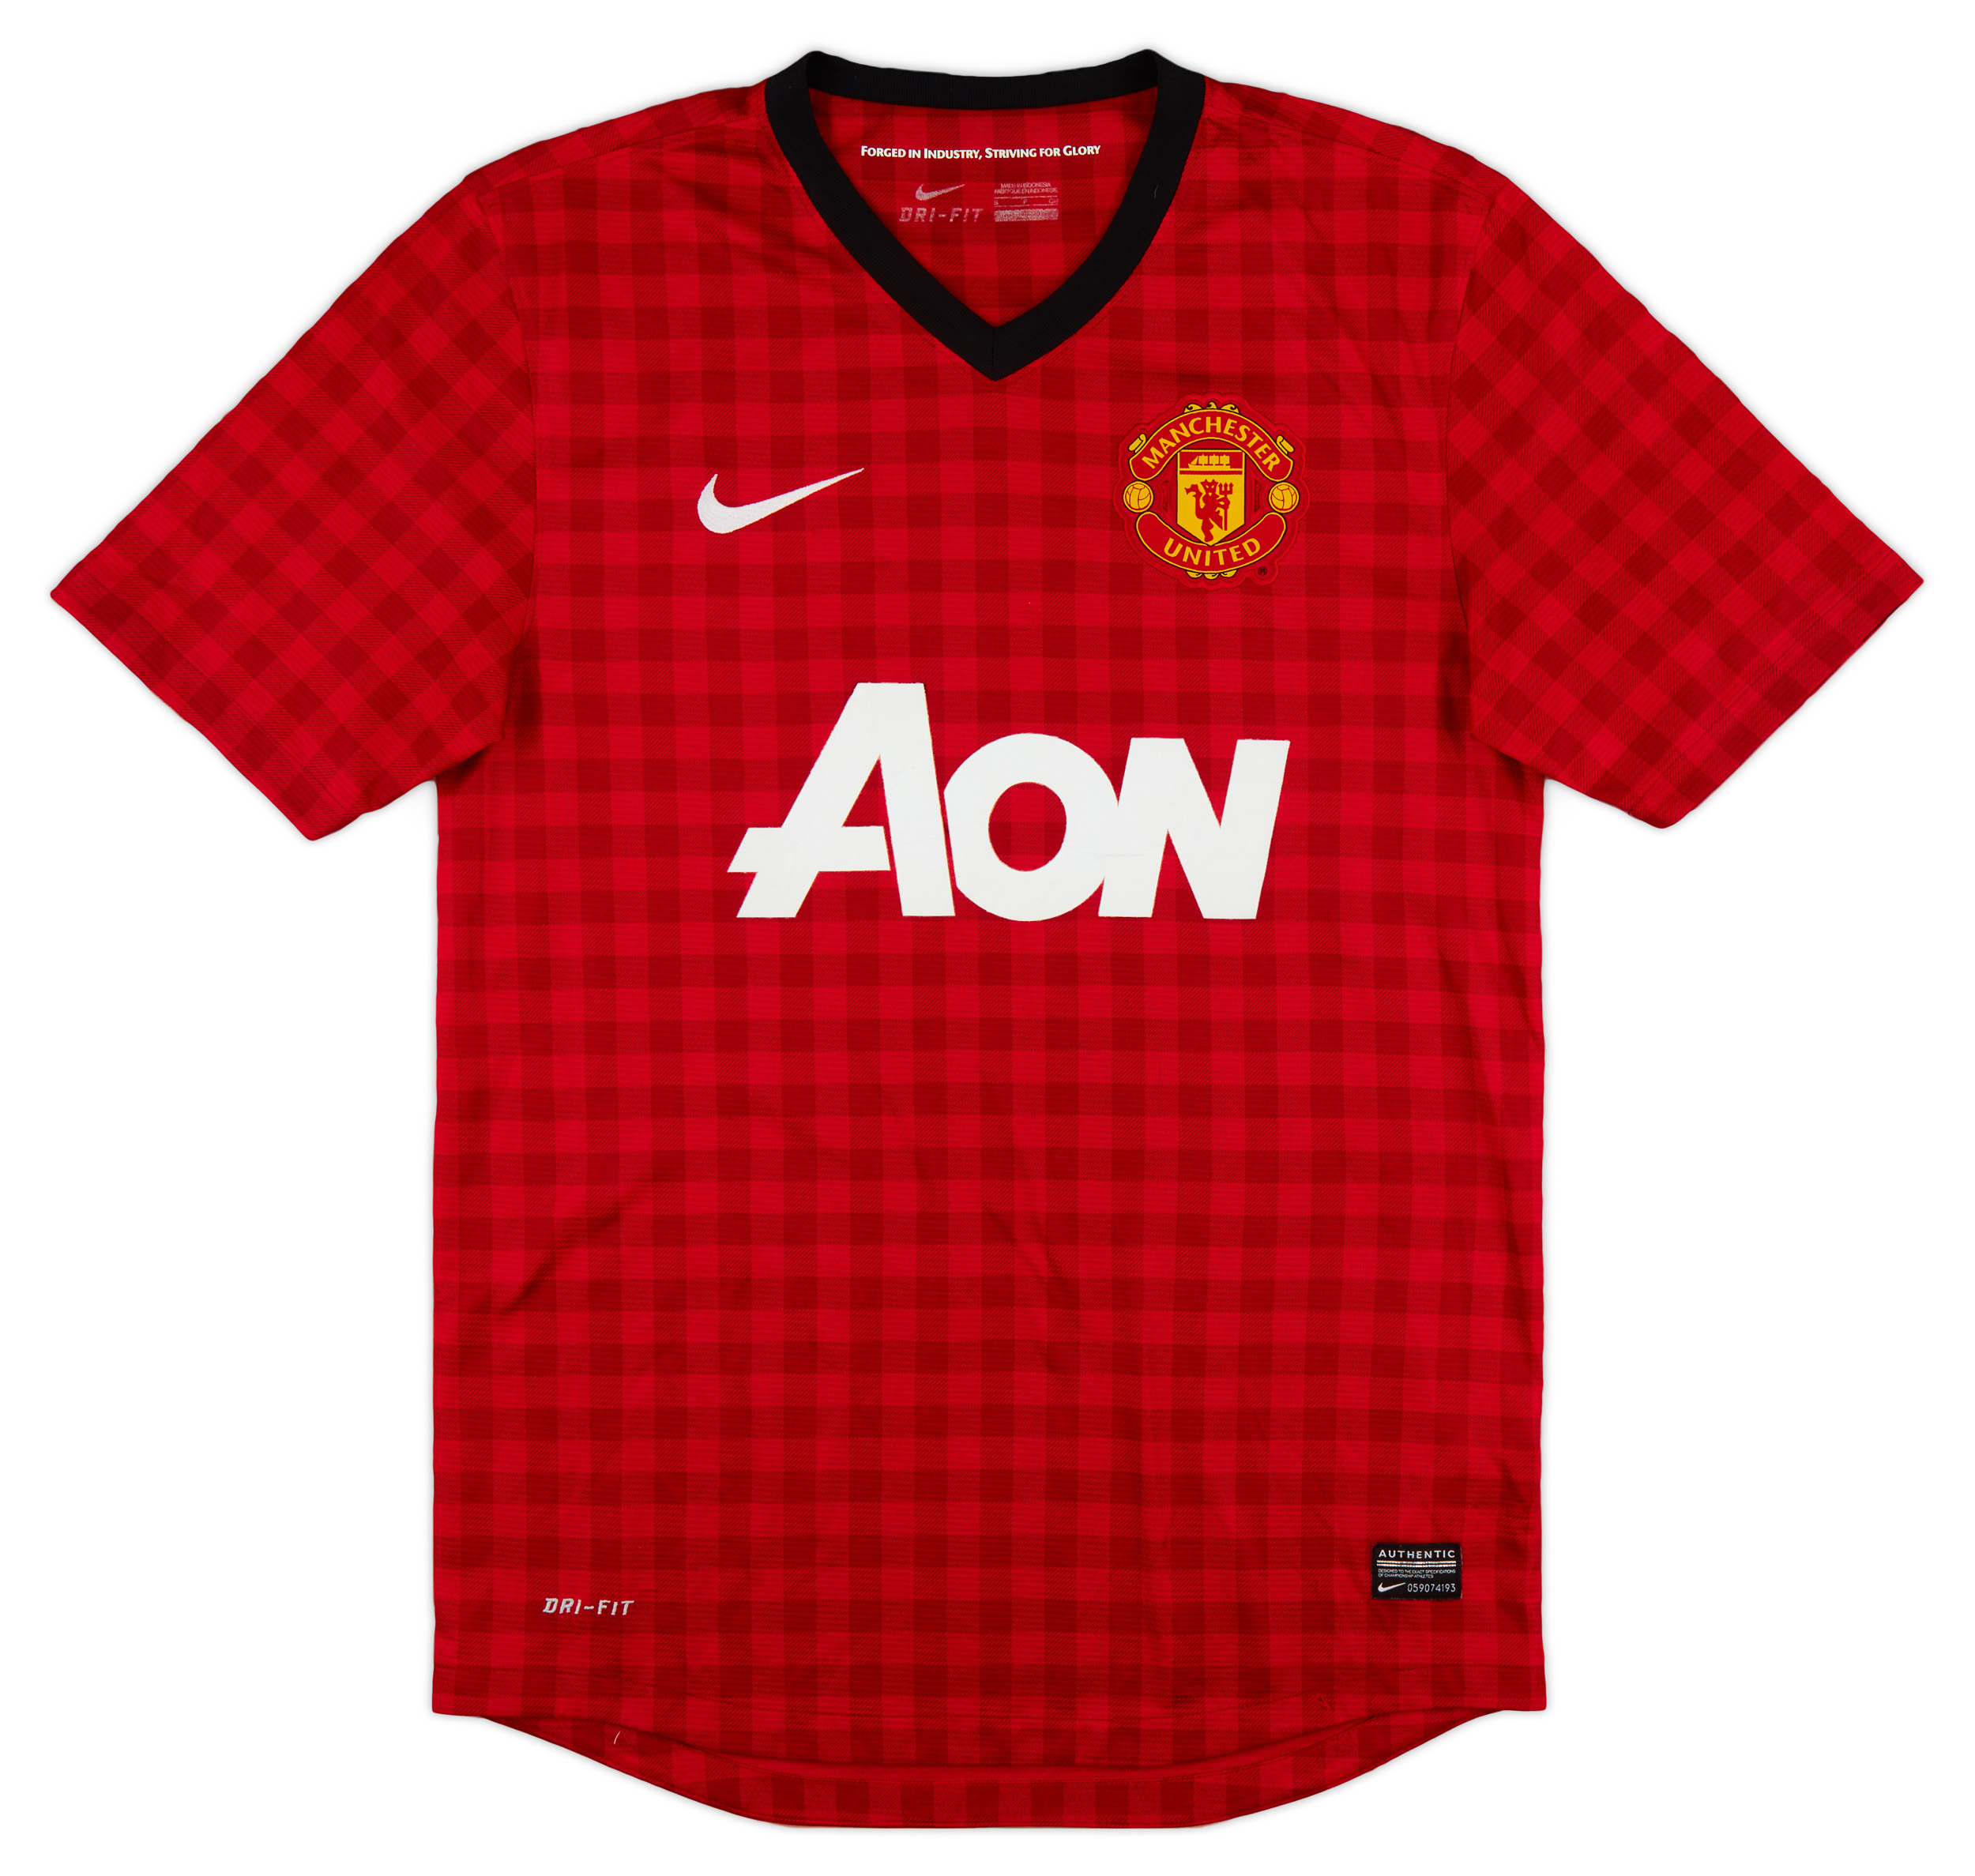 2012-13 Manchester United Home Shirt - 5/10 - ()